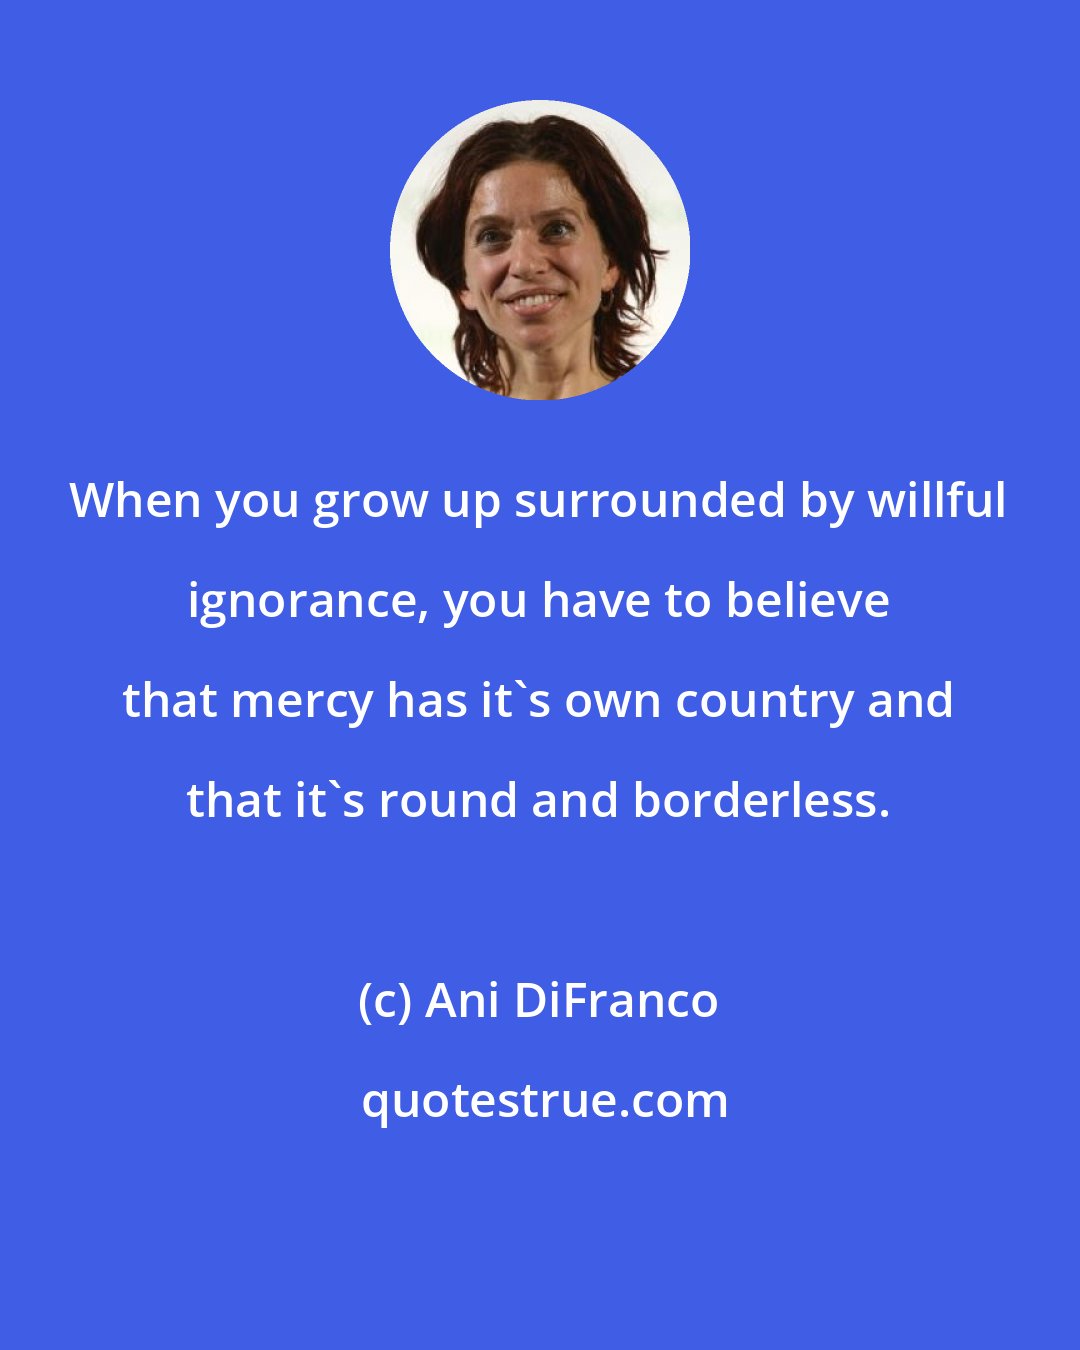 Ani DiFranco: When you grow up surrounded by willful ignorance, you have to believe that mercy has it's own country and that it's round and borderless.